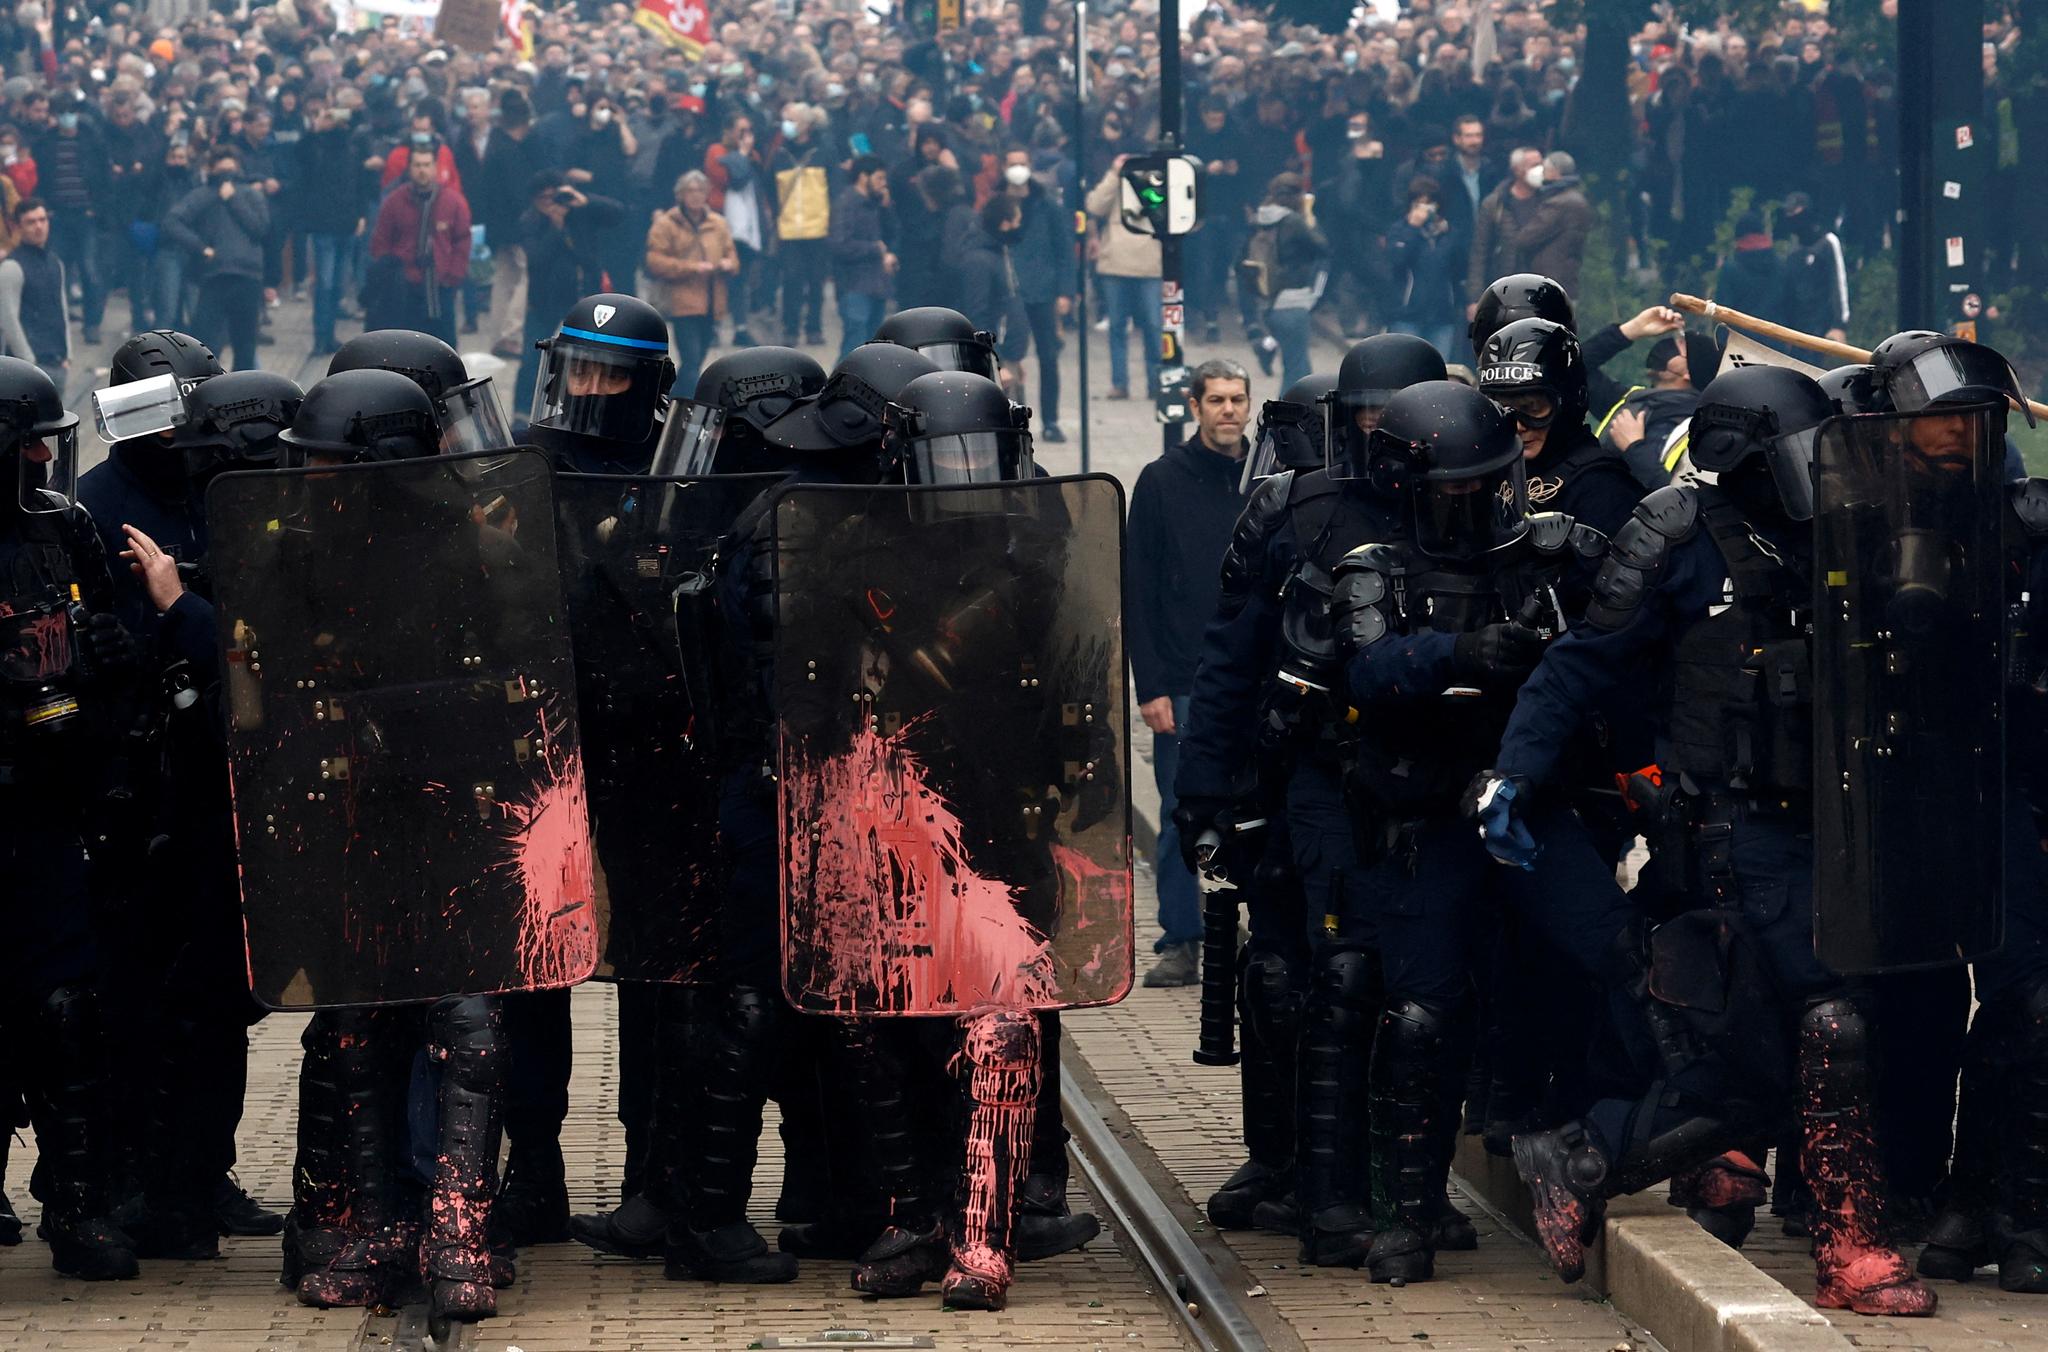 Broken shop windows and arrests.  On Tuesday, France again took to the streets against pension reforms